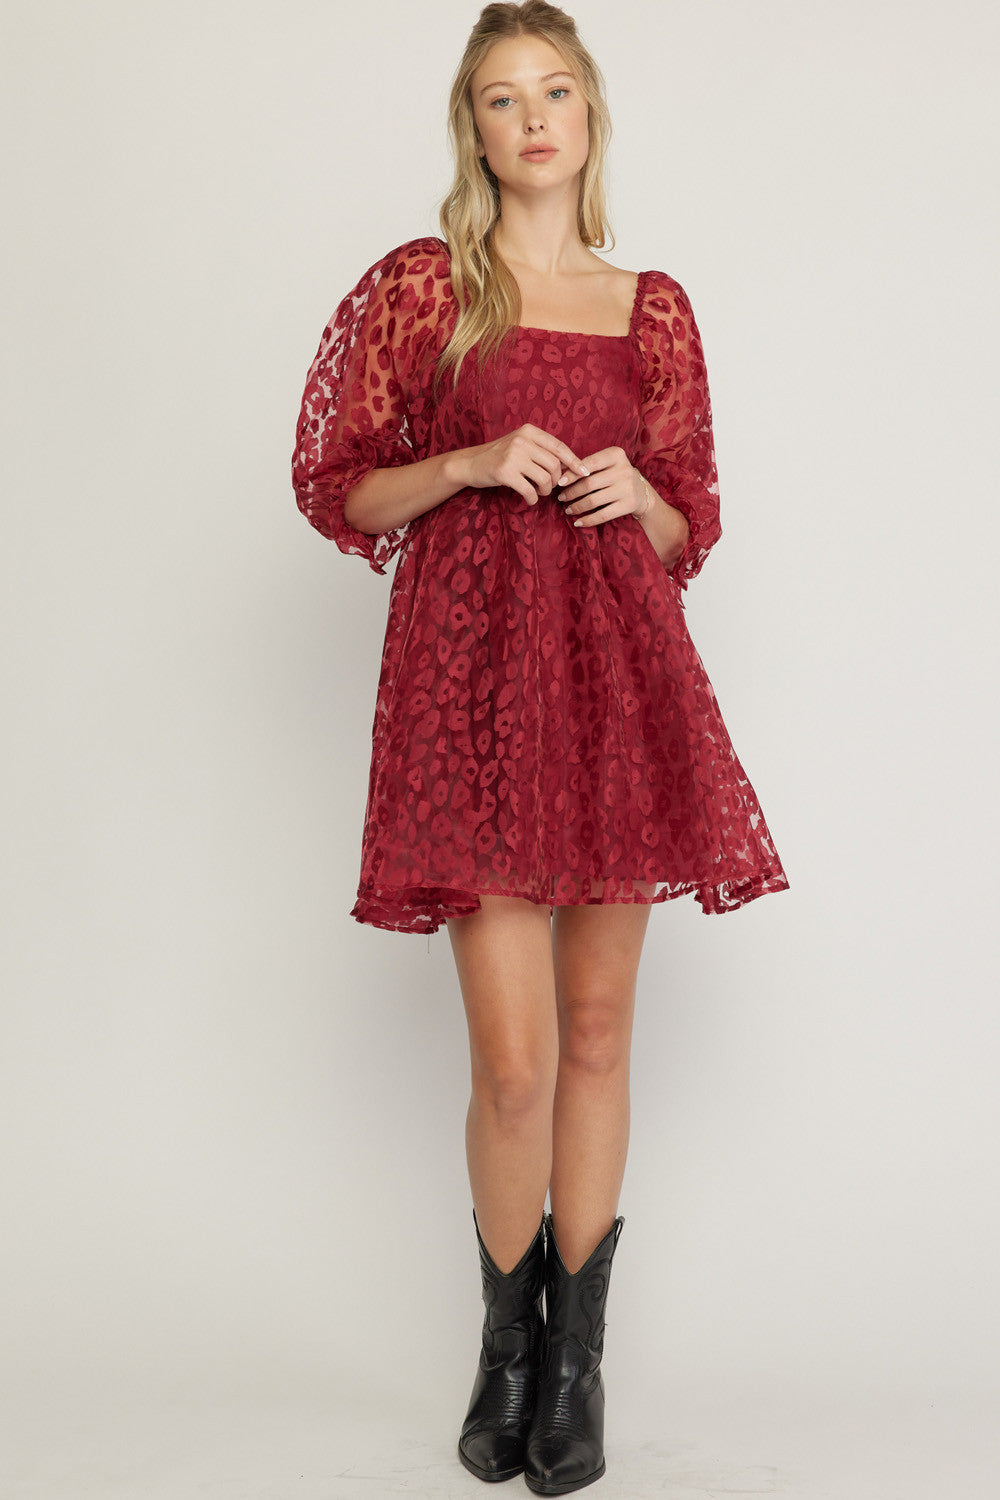 Seal With A Kiss Dress - Burgundy